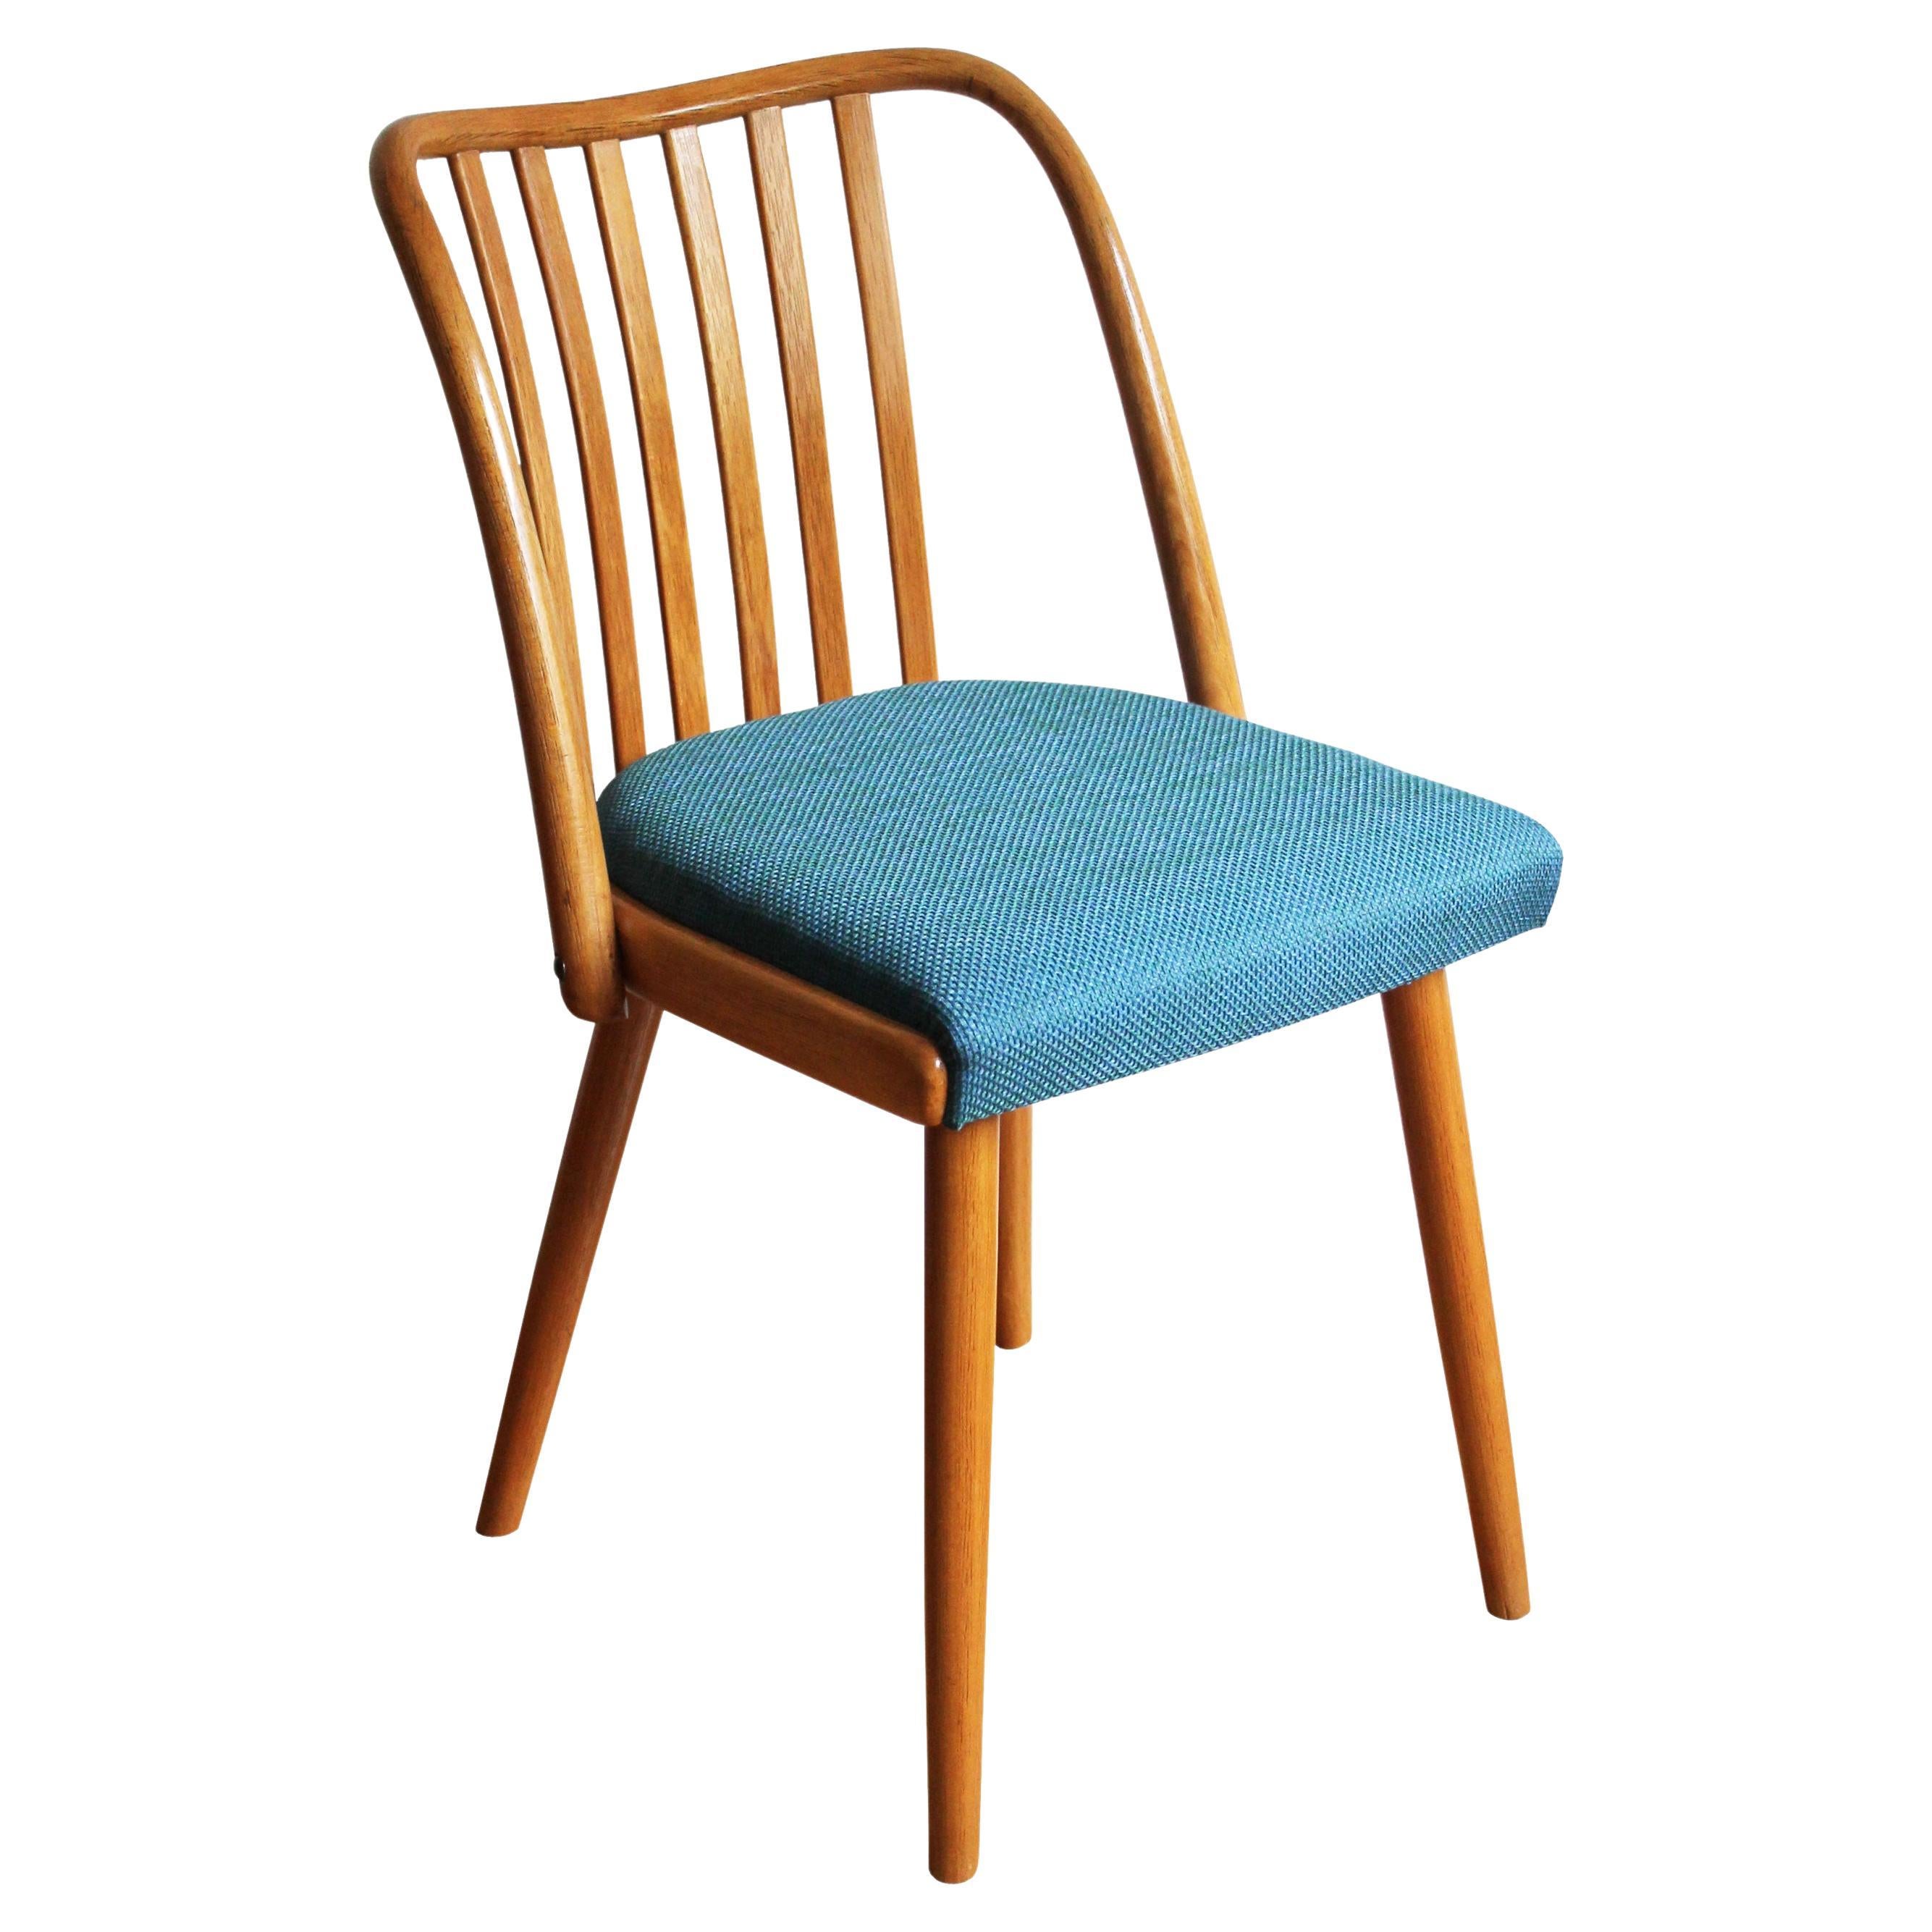 1960's Mid Century Dining Chair Model U - 300 by Antonin Suman For Sale